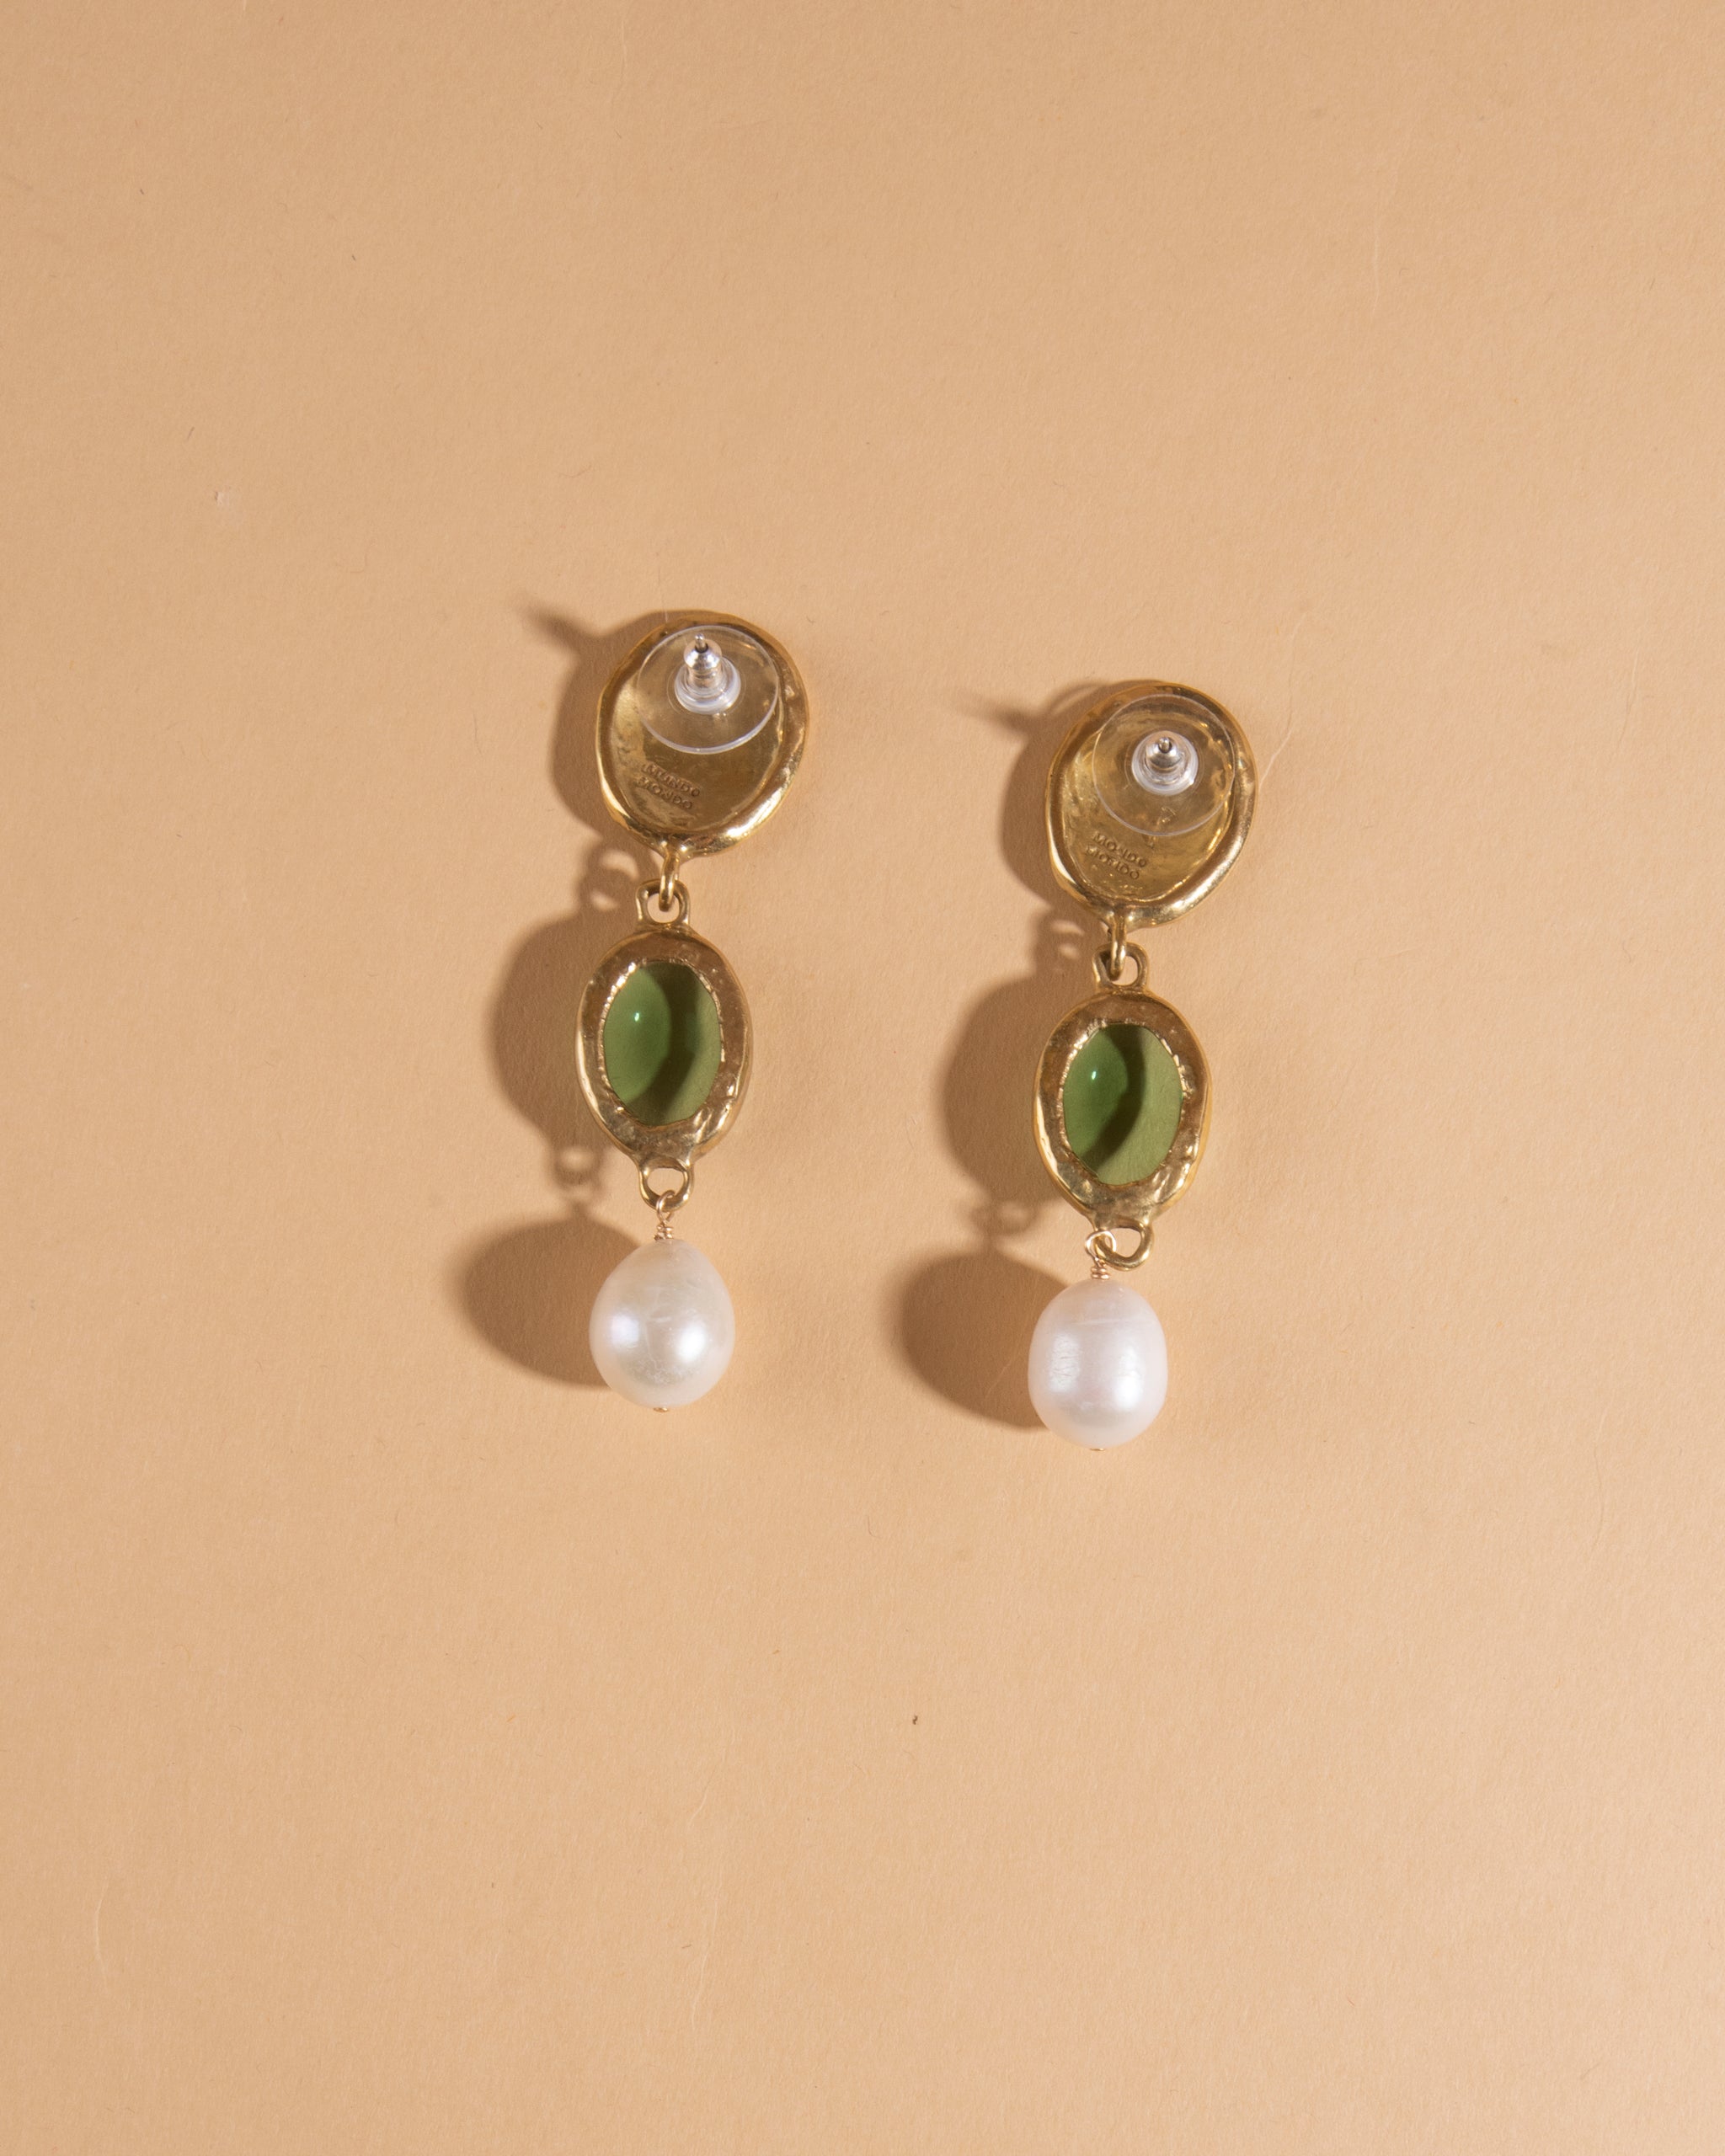 MONDO MONDO Sirena Earrings Pair of brass drop earrings with green glass stones and baroque pearls